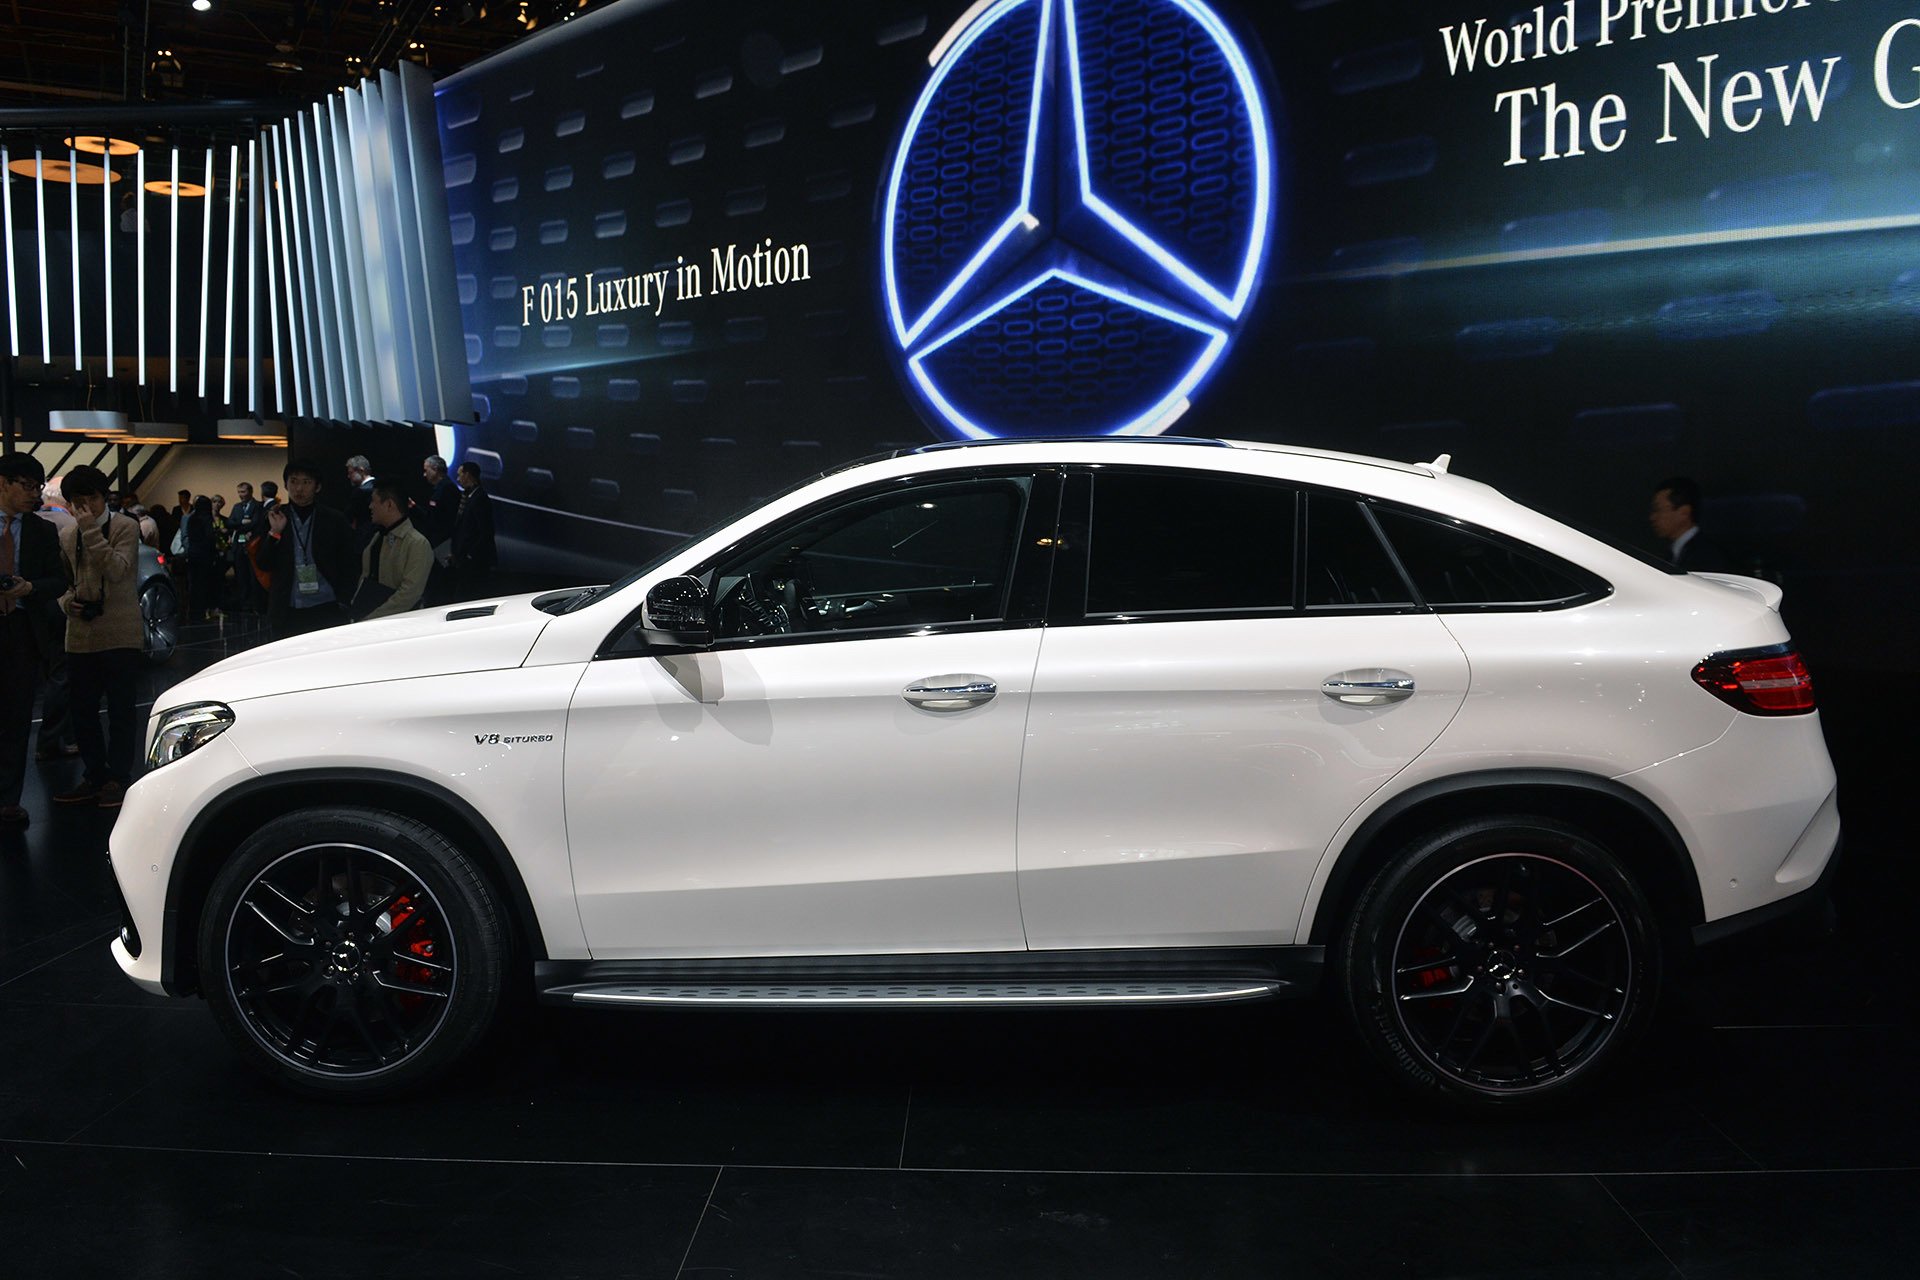 2016, Amg, Benz, Cars, Coupe, Gle63, Mercedes, Suv Wallpaper